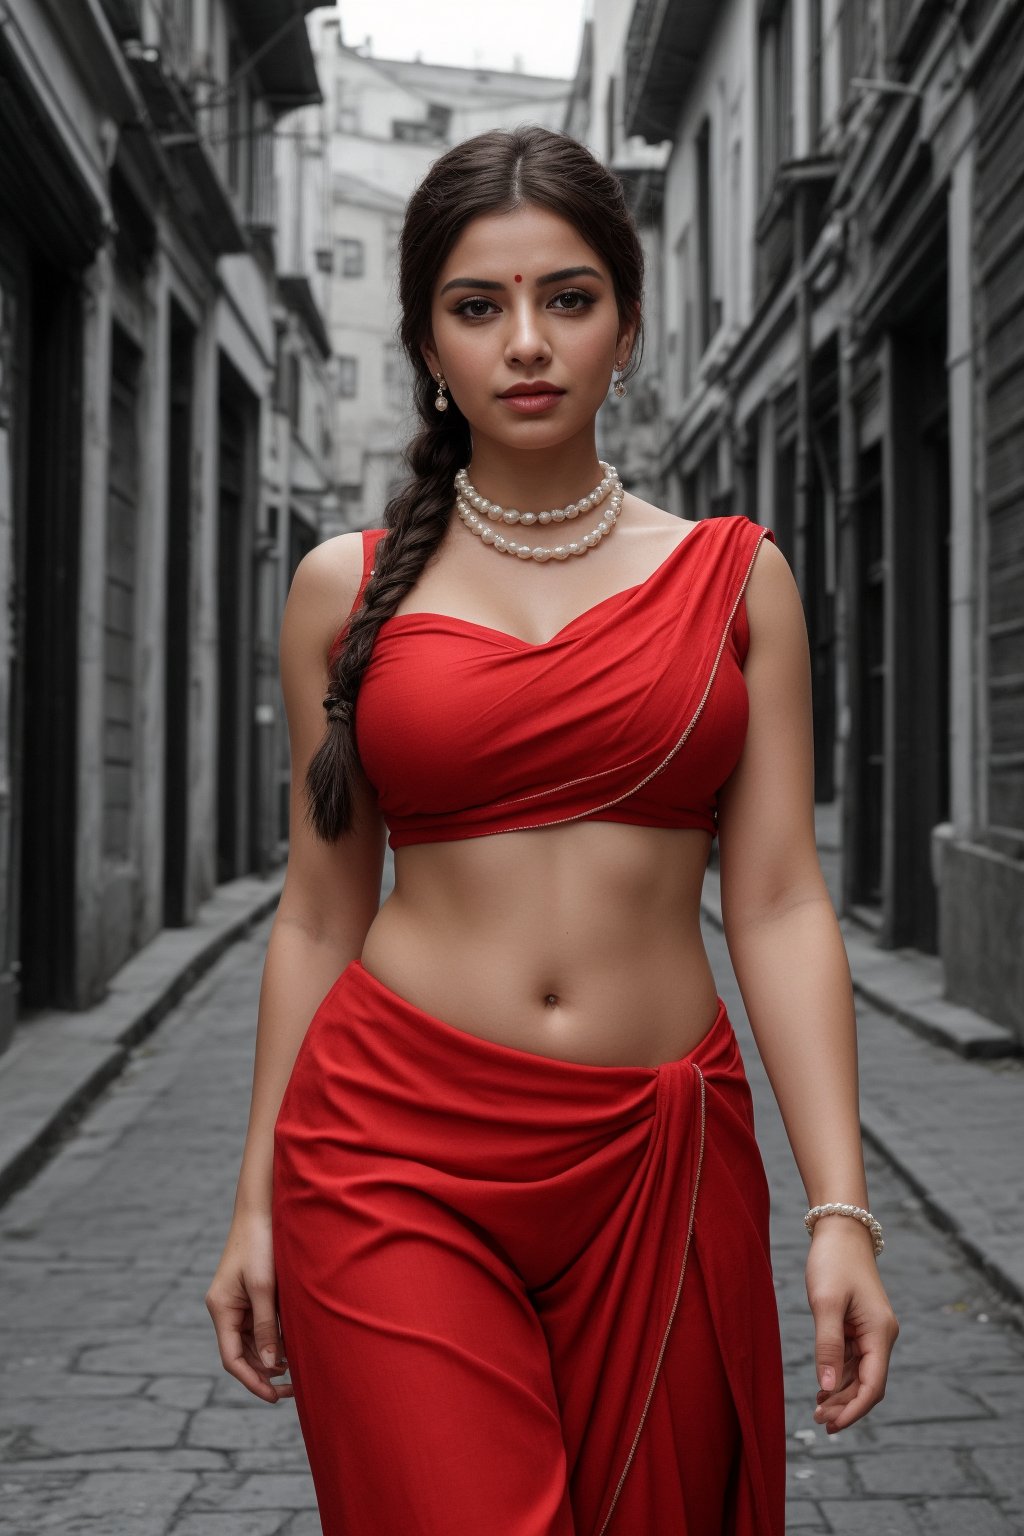 Russian girl, in city, out side, Red hair braided hair:2, She remove Her  saree from  navel,  front view, braided hair tail, A sultry shot of a 28-year-old woman wearing a stunning  saree:1, showcasing her curvy figure. She poses solo-focused, looking directly at the viewer with alluring hair. Her thick body is accentuated by a sleeveless dress and hotpants, while her big breast,  A pearl necklace adorns her neck, complemented by dangling earrings and a bracelet. Her lips pout slightly, inviting attention to her The background is blurry, with a ground vehicle visible in the distance. Her eyes, like perfect pearls, gaze directly at us, captivating our attention.,Saree 